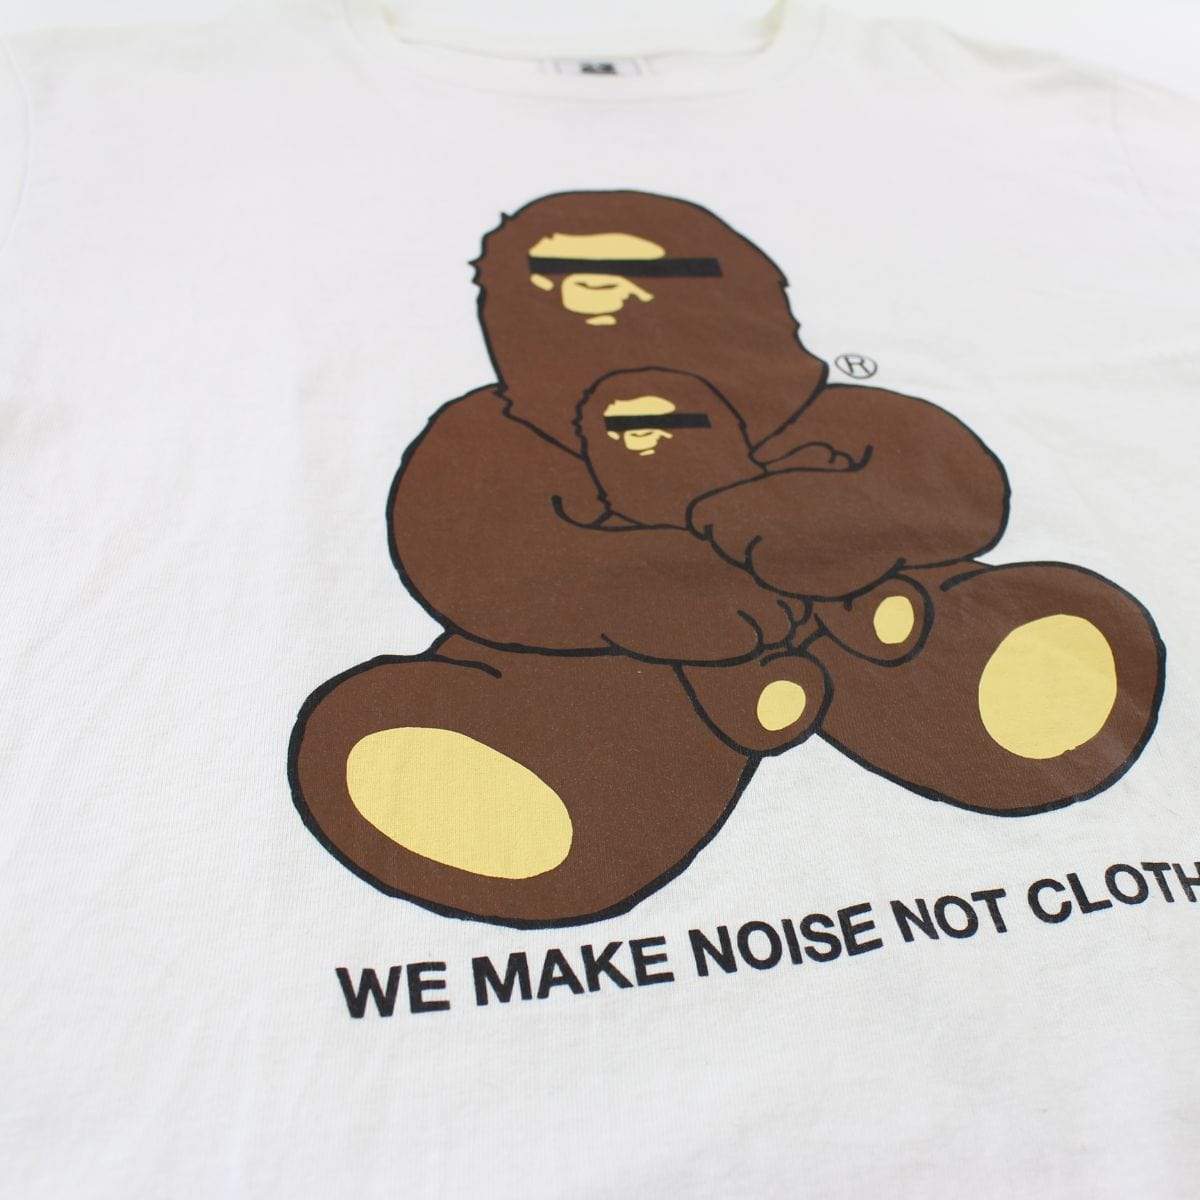 Bape We Make Noise Not Clothes Tee White - SaruGeneral